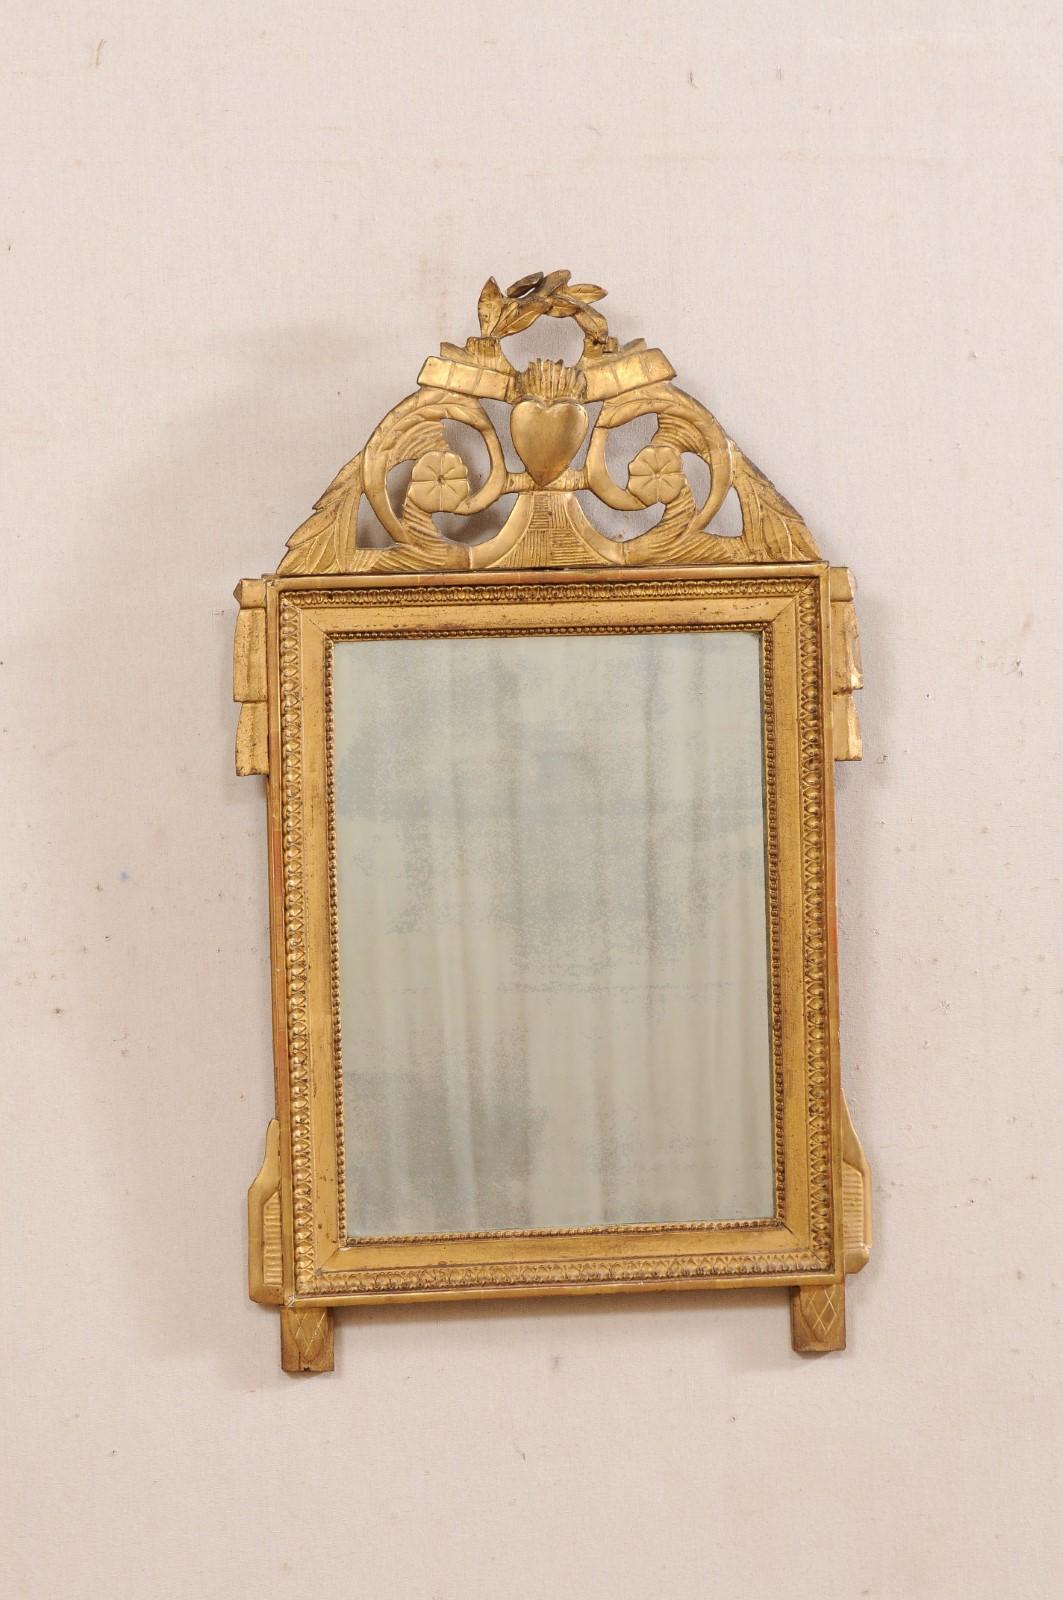 A French carved and gilt wood mirror from the 19th century. This antique mirror from France has a carved wood, rectangular-shaped frame with a lamb's tongue and petite beaded trim accent, and adorn with a pierce-carved raised crest of foliate, a